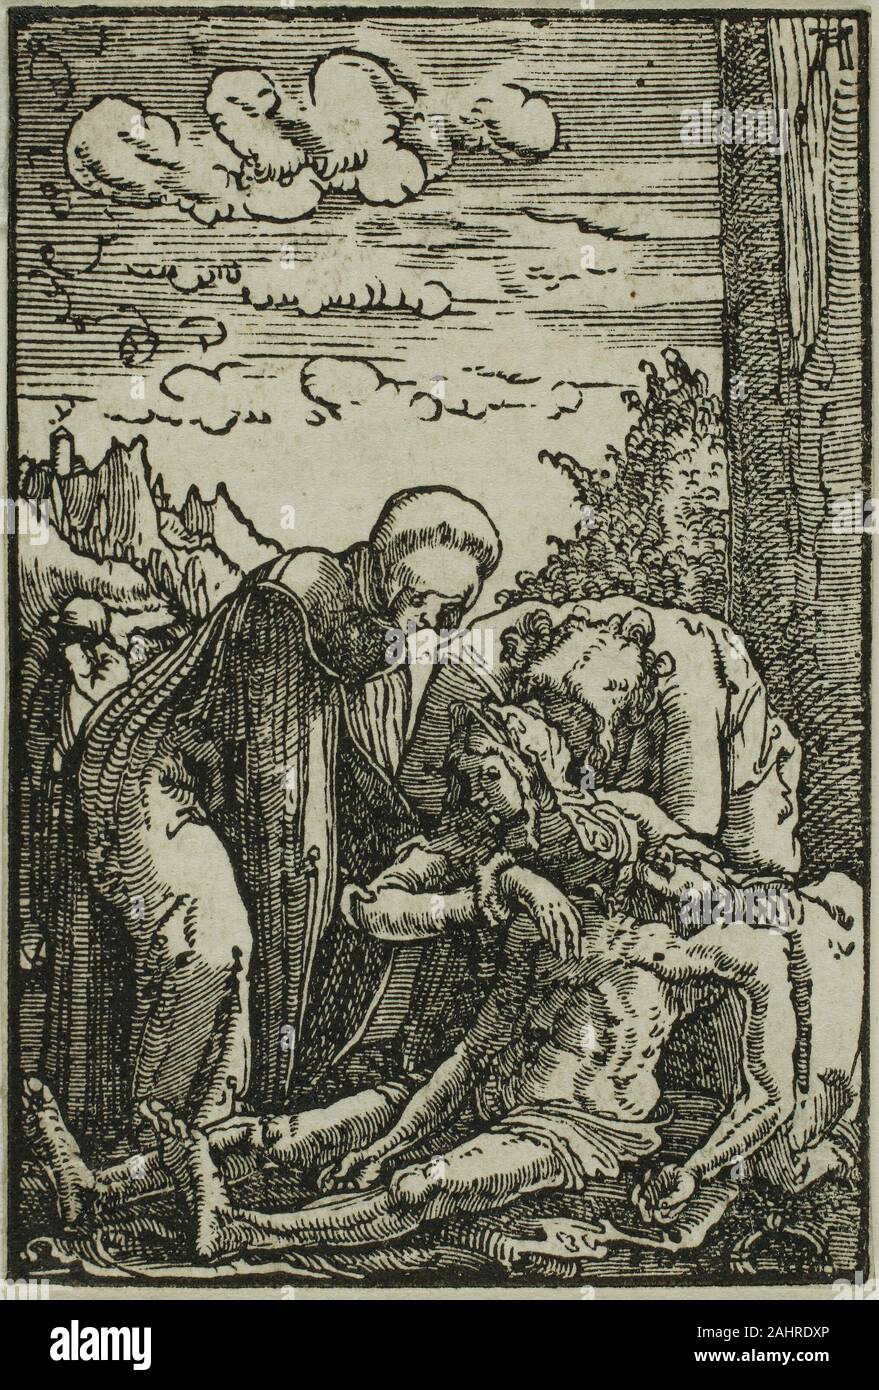 Albrecht Altdorfer. The Lamentation of the Virgin, from The Fall and Redemption of Man. 1510–1518. Germany. Woodcut in black on ivory laid paper Stock Photo